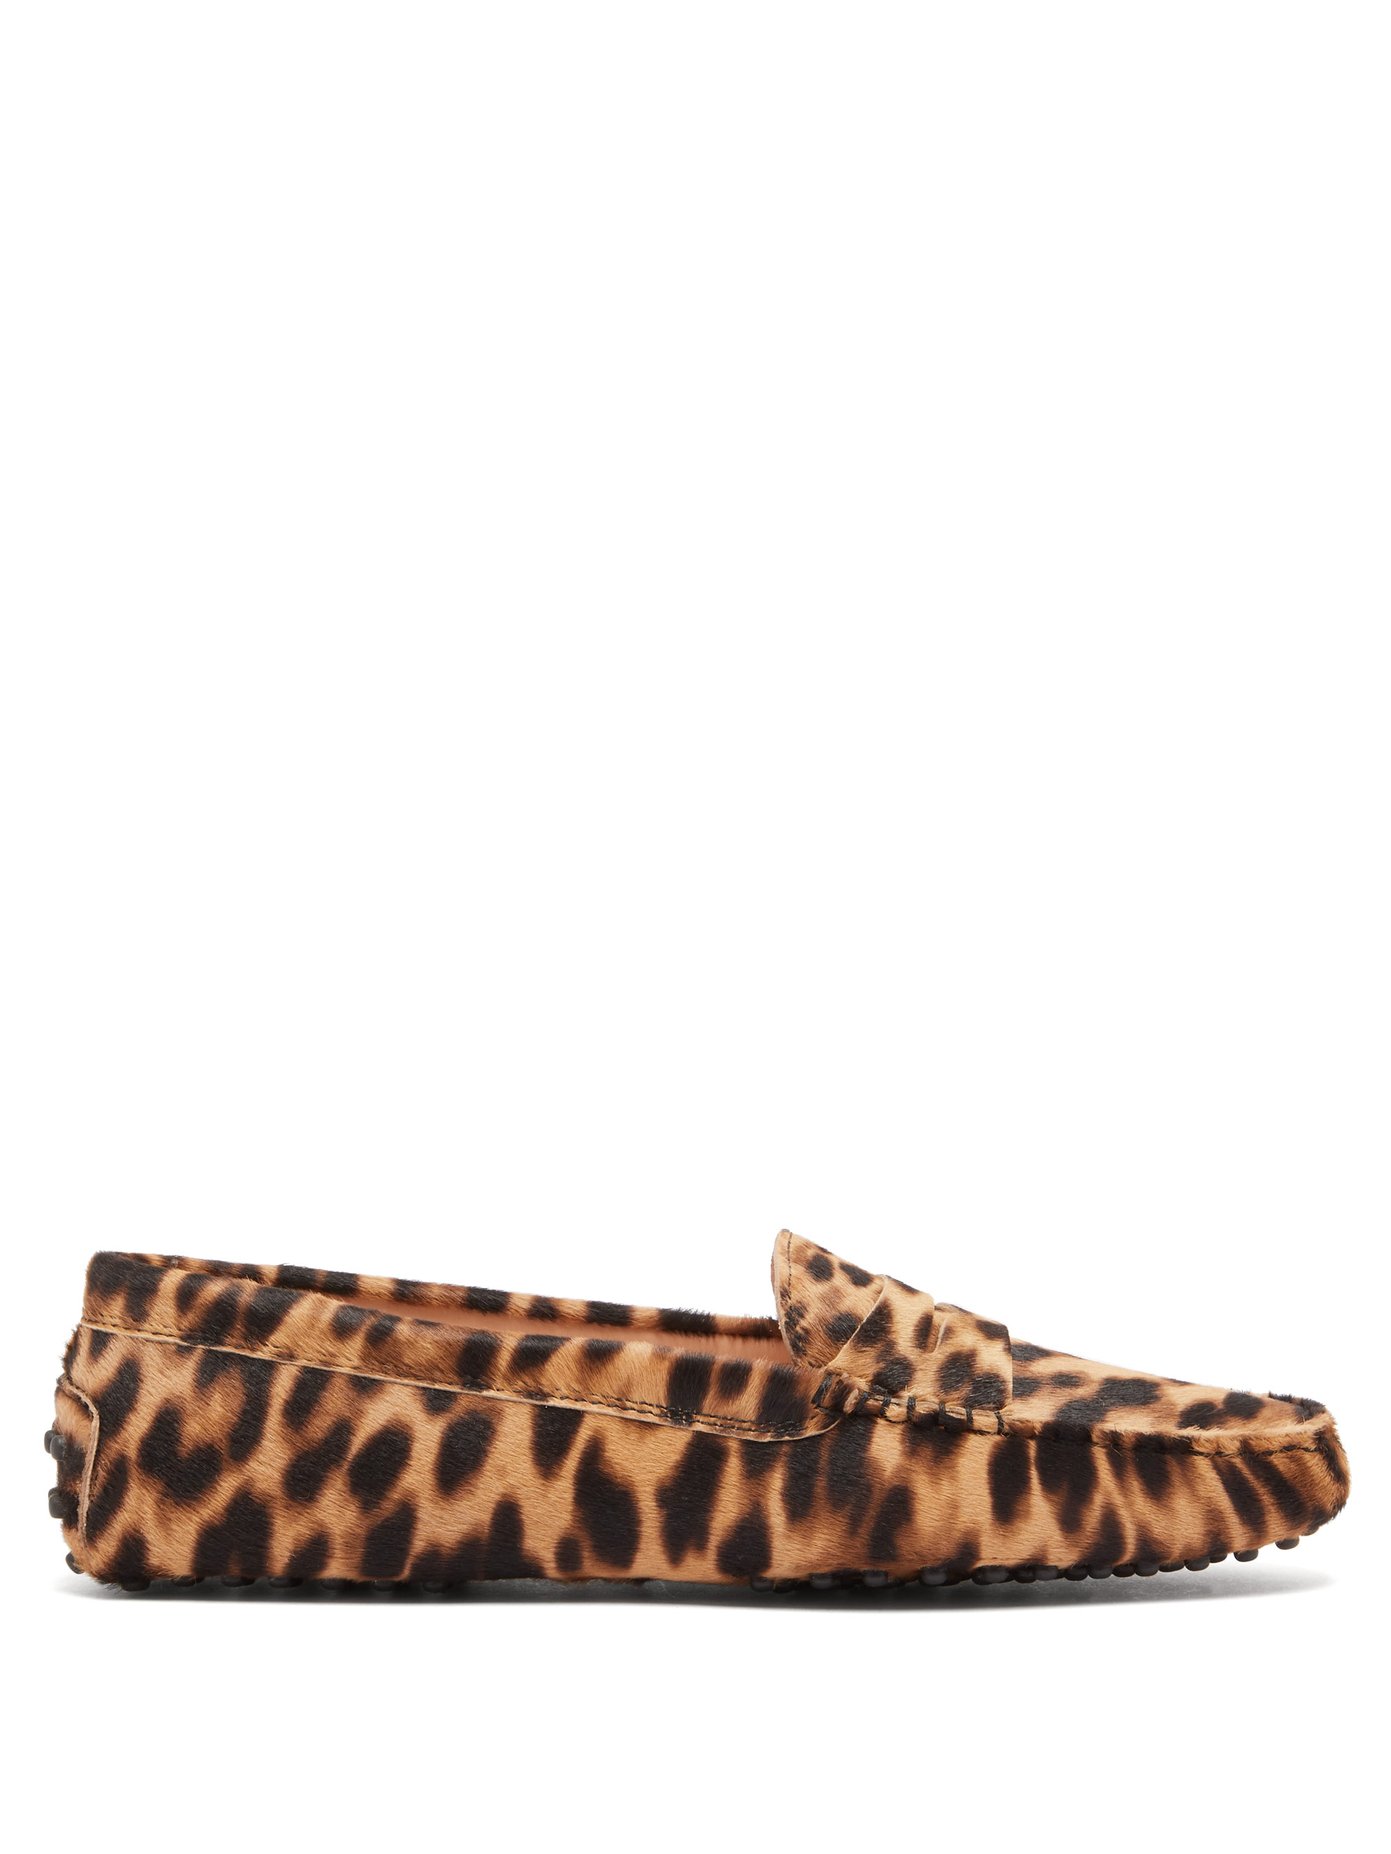 tod's leopard print loafers